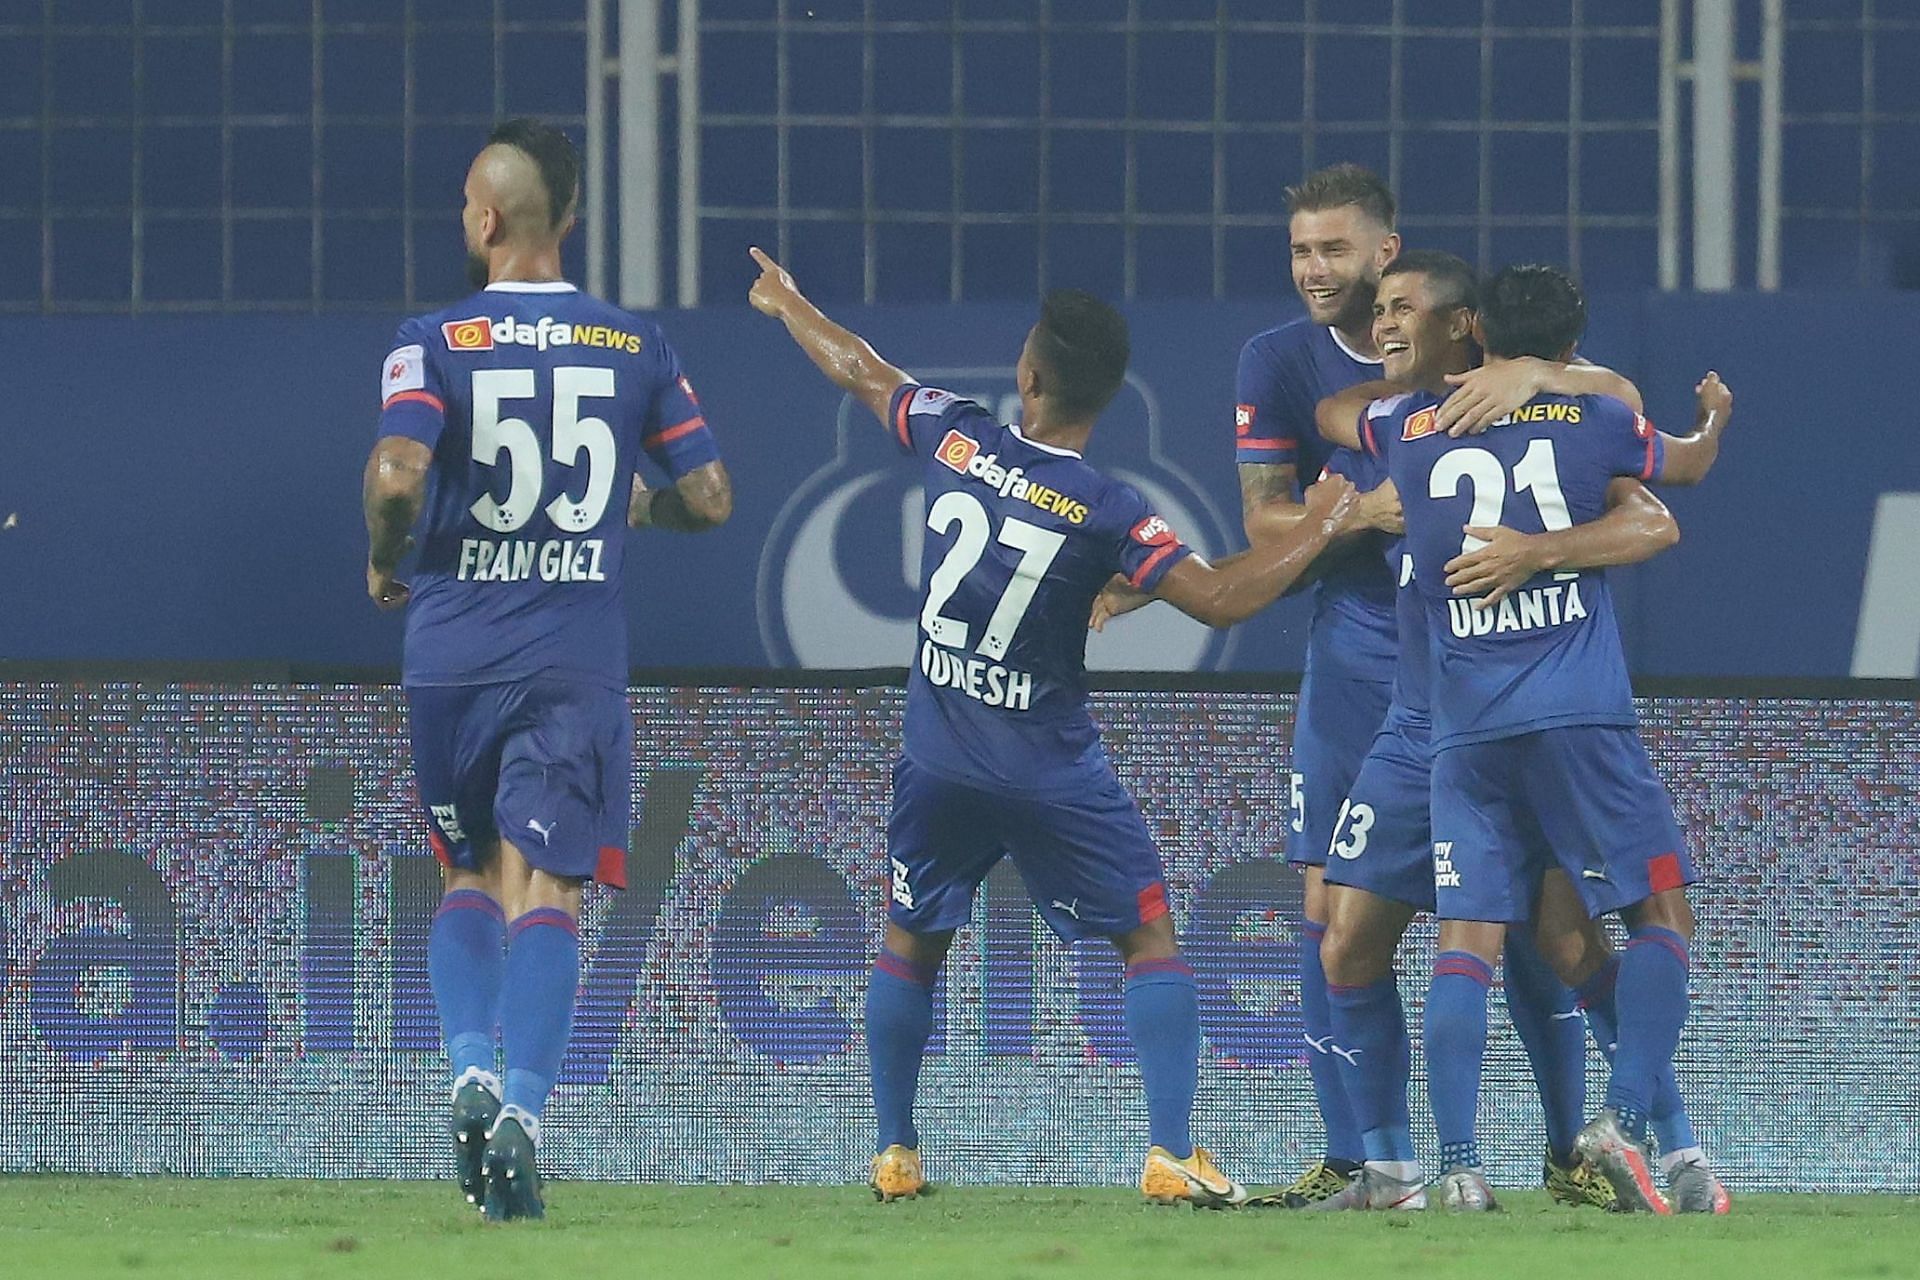 Bengaluru FC need to sort out their defensive issues.